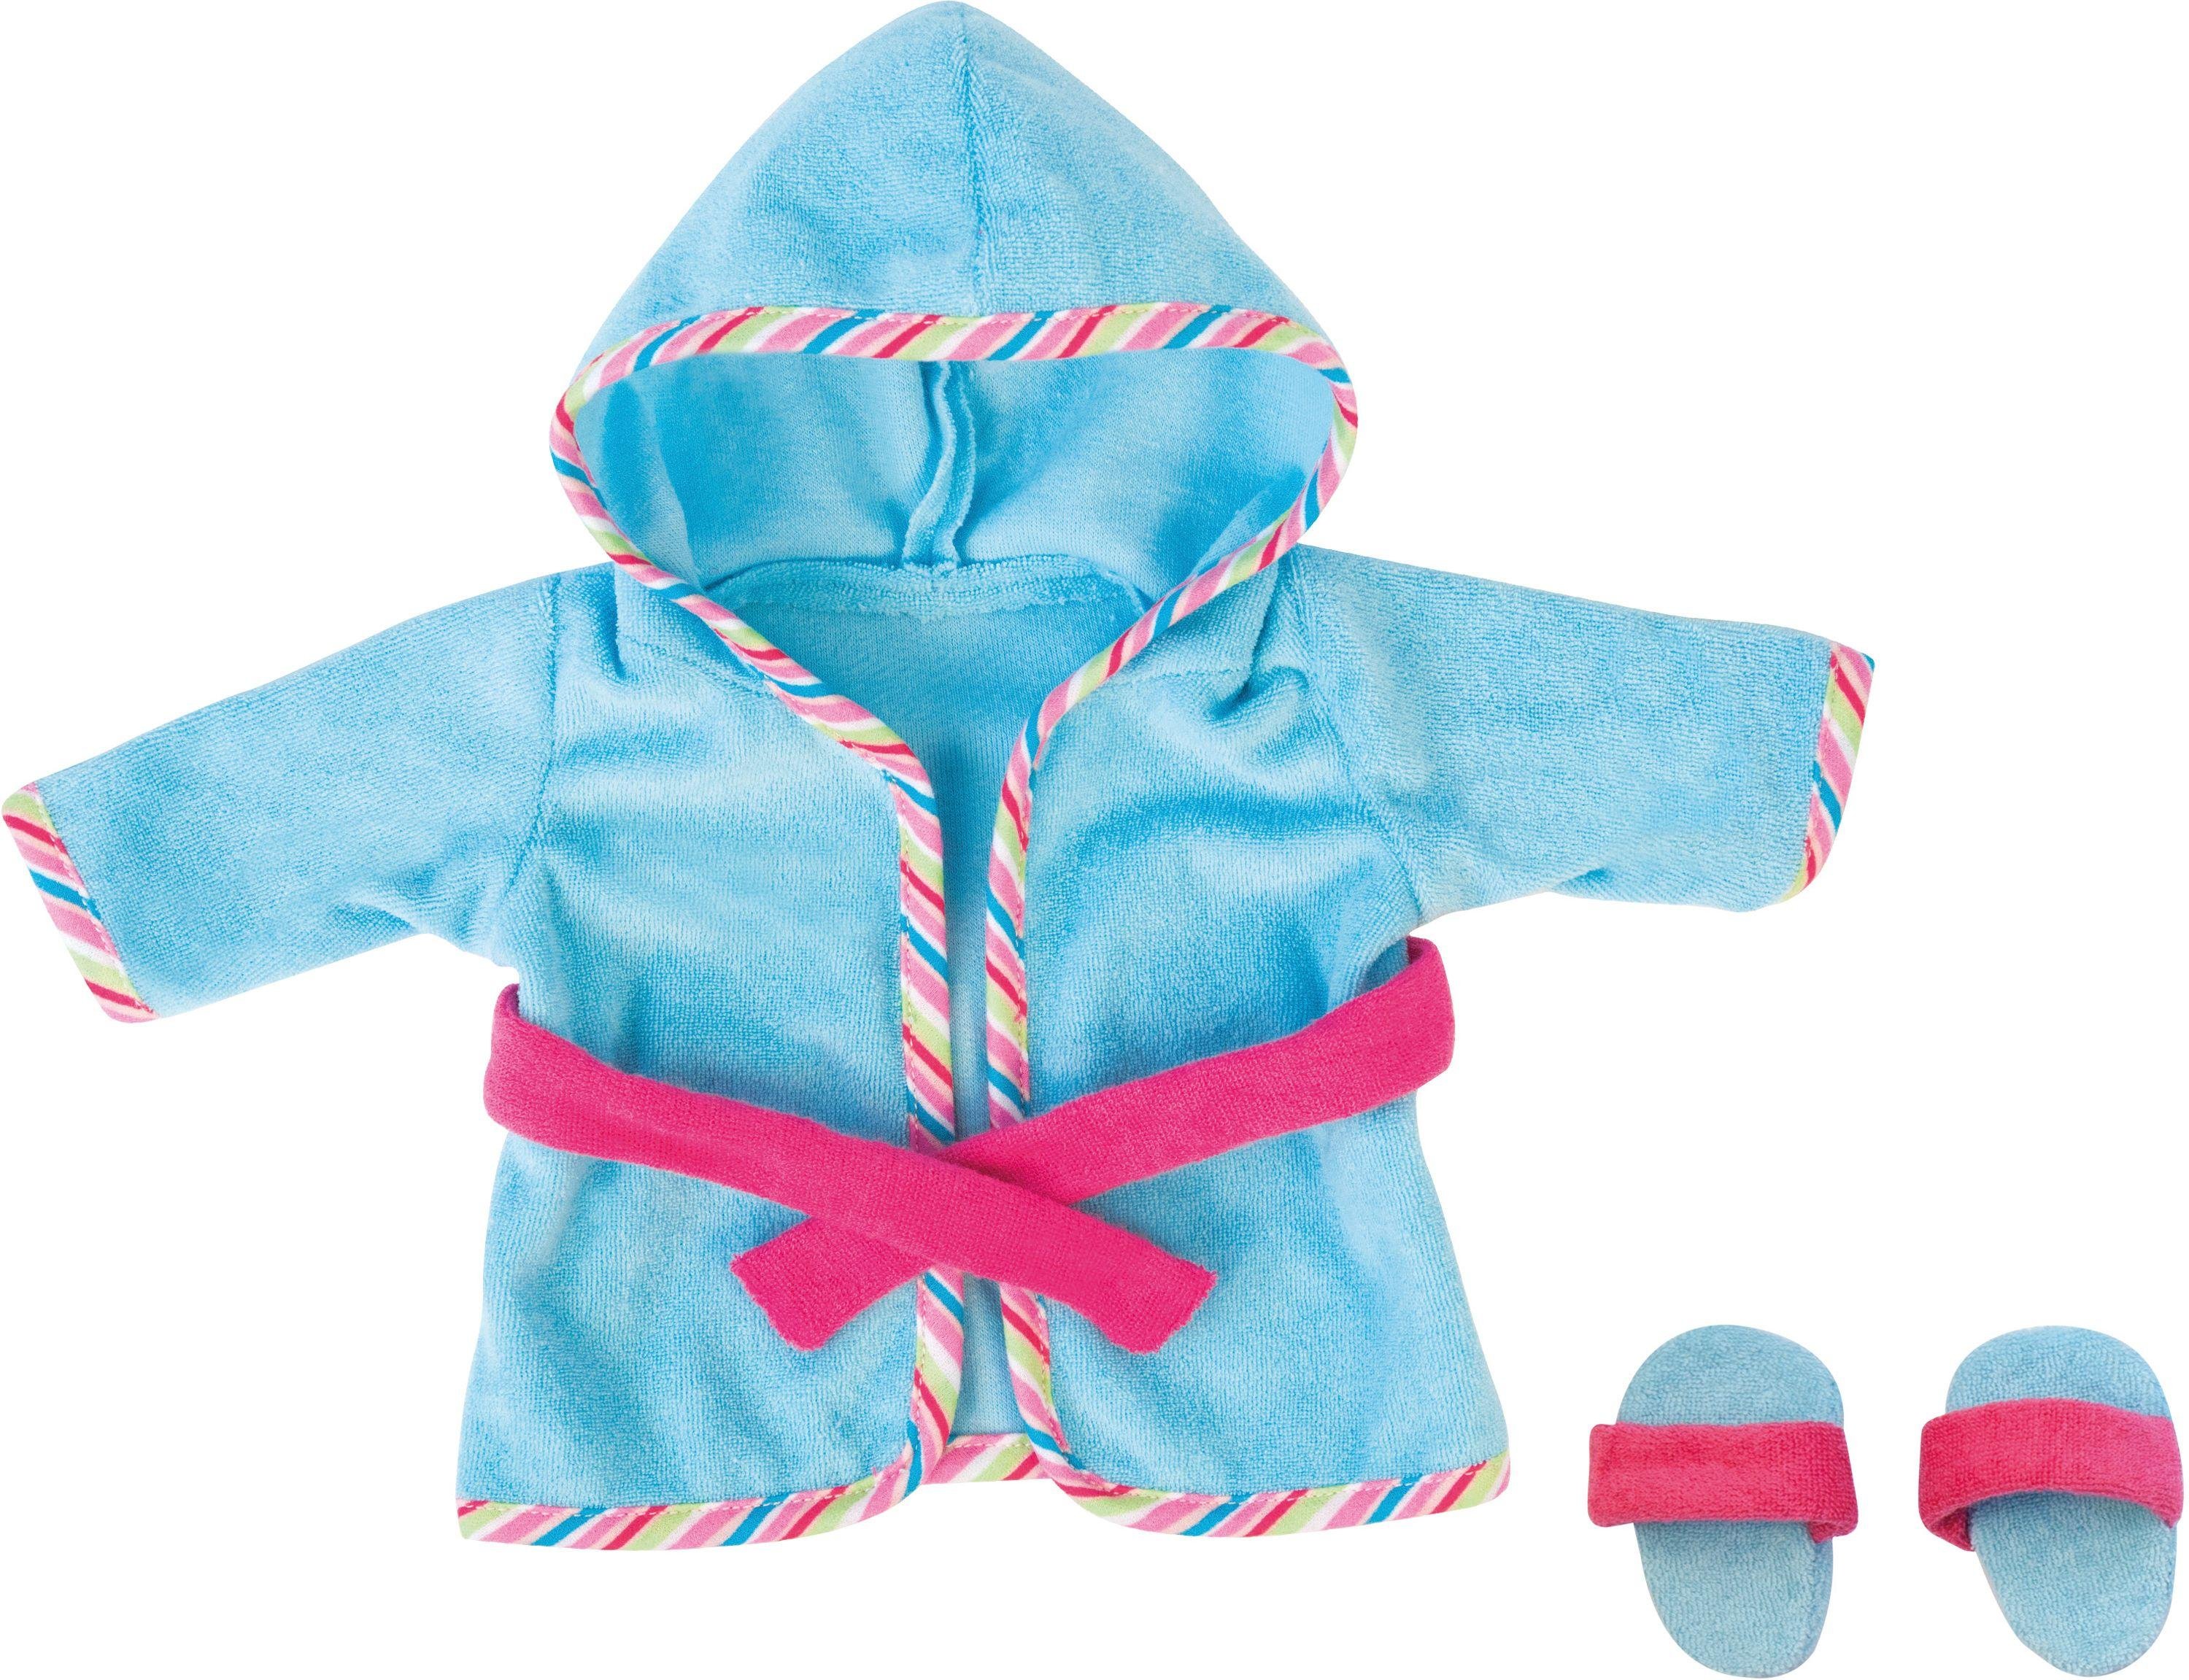 Sweet Blue Bathrobe and Slippers review